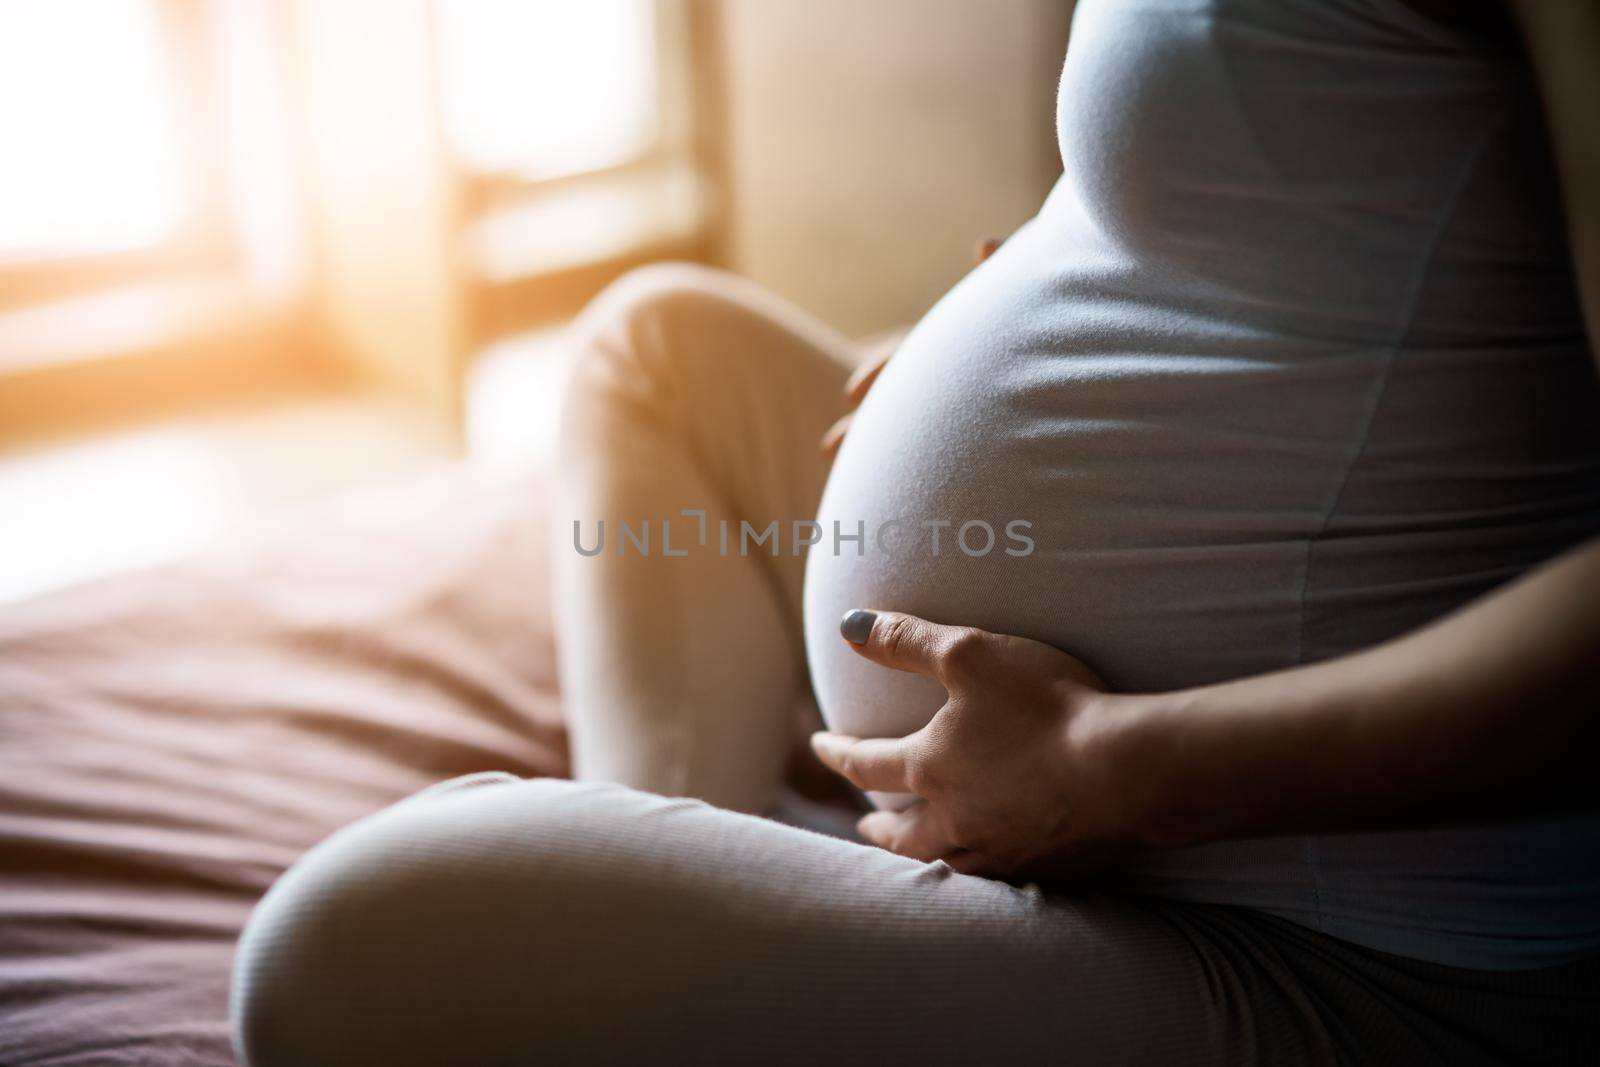 Pregnant woman relaxing at home. She is sitting on bed in bedroom.